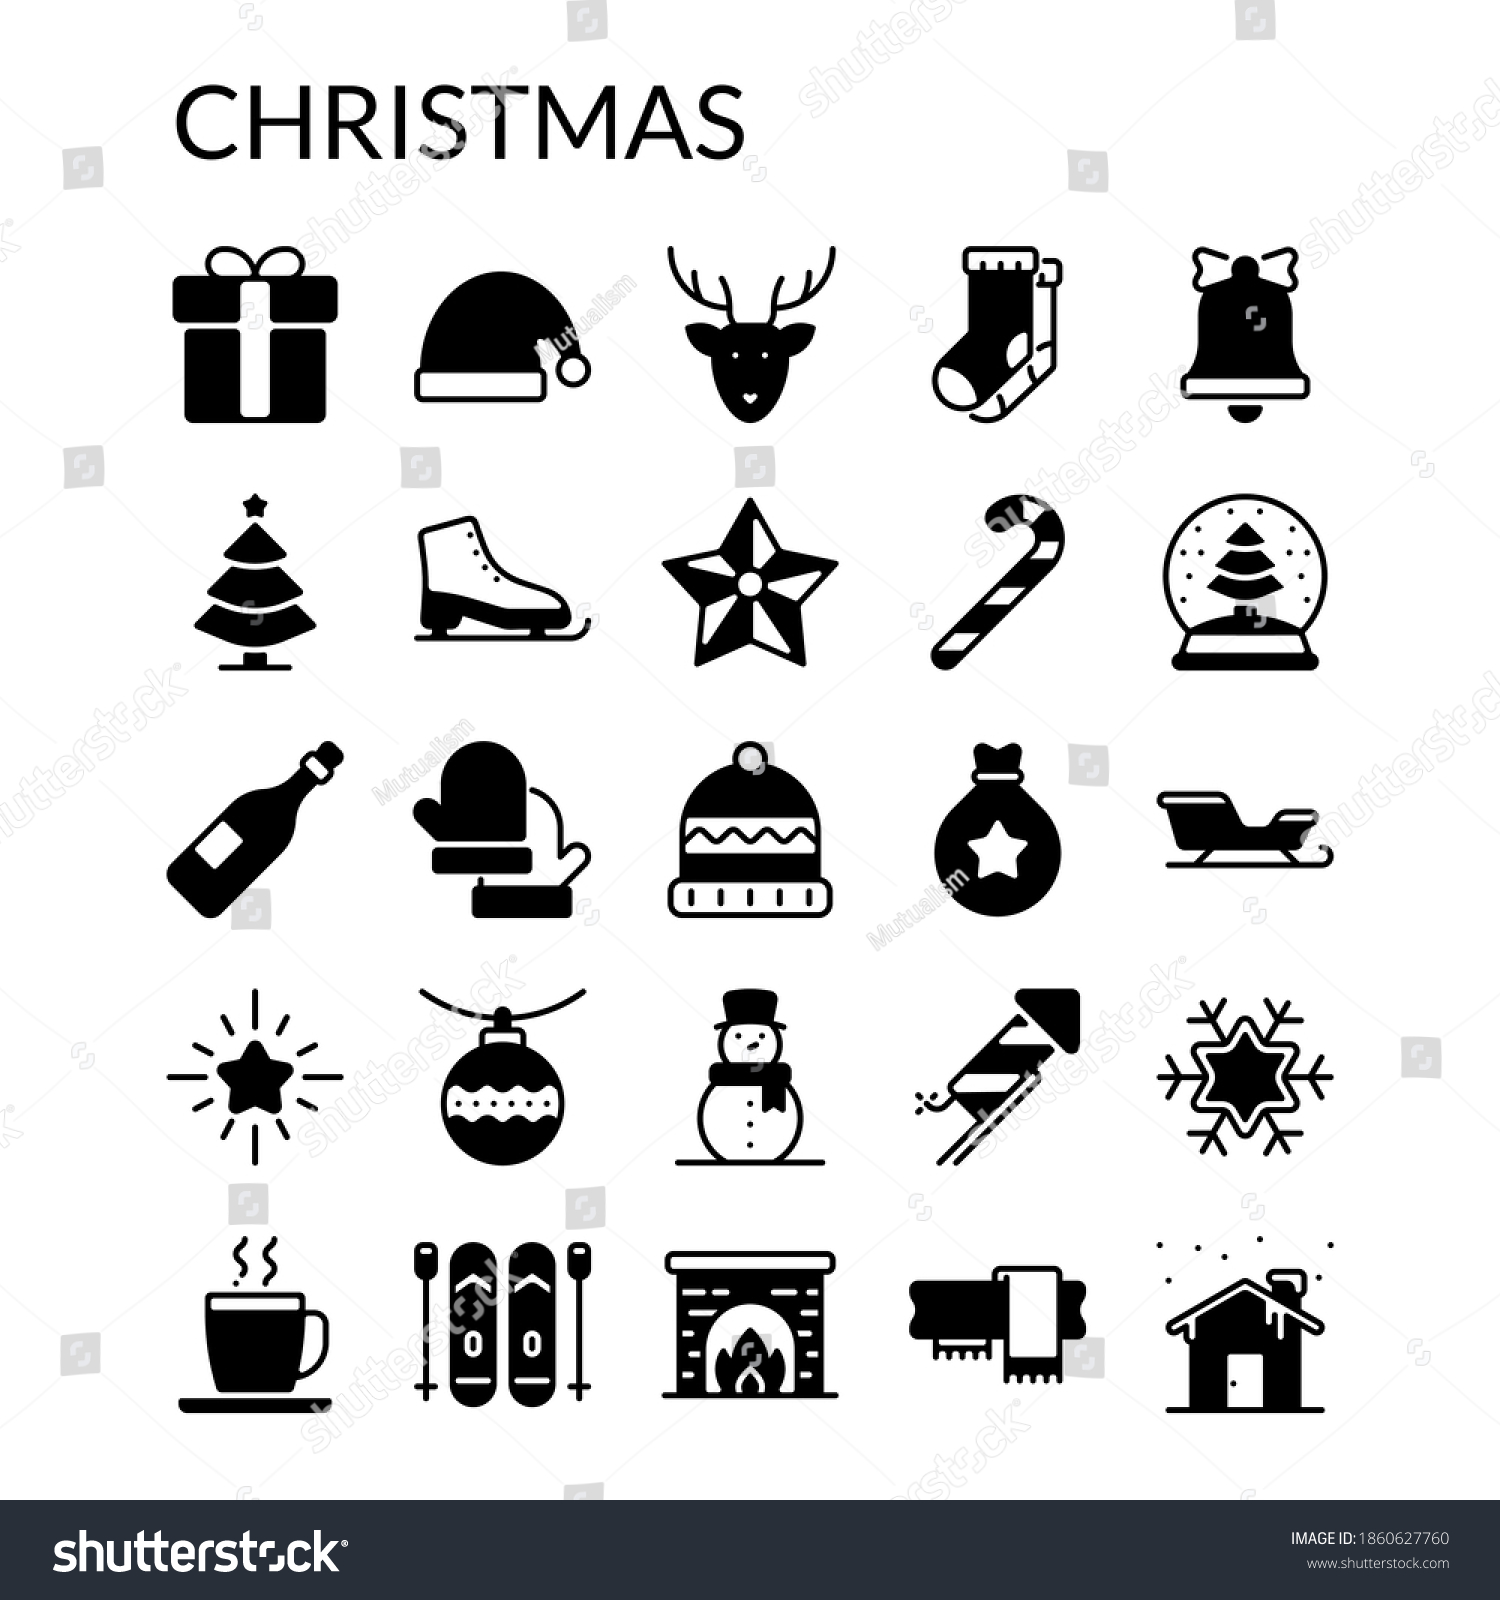 Simple Christmas Icon Set Glyph Style Stock Vector (Royalty Free ...